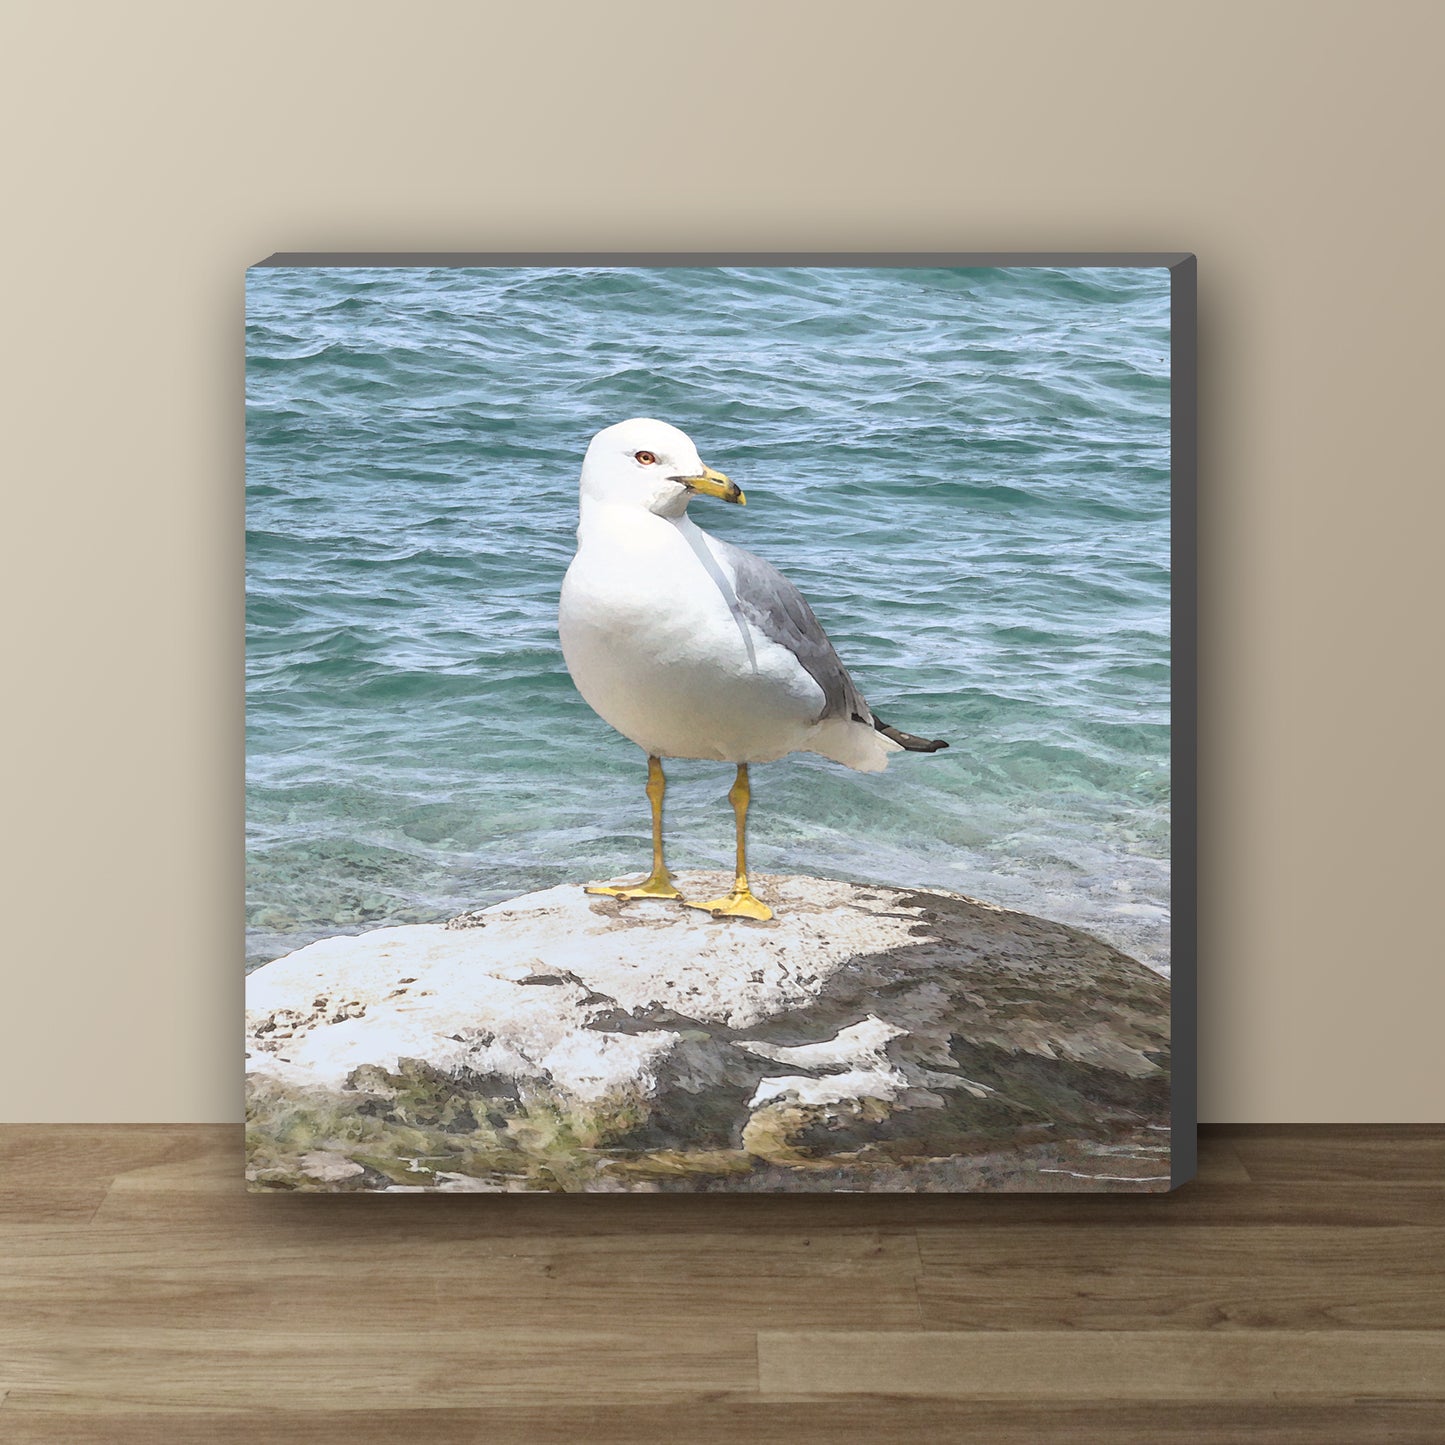 Seagull by the Shore Wrapped Canvas Print